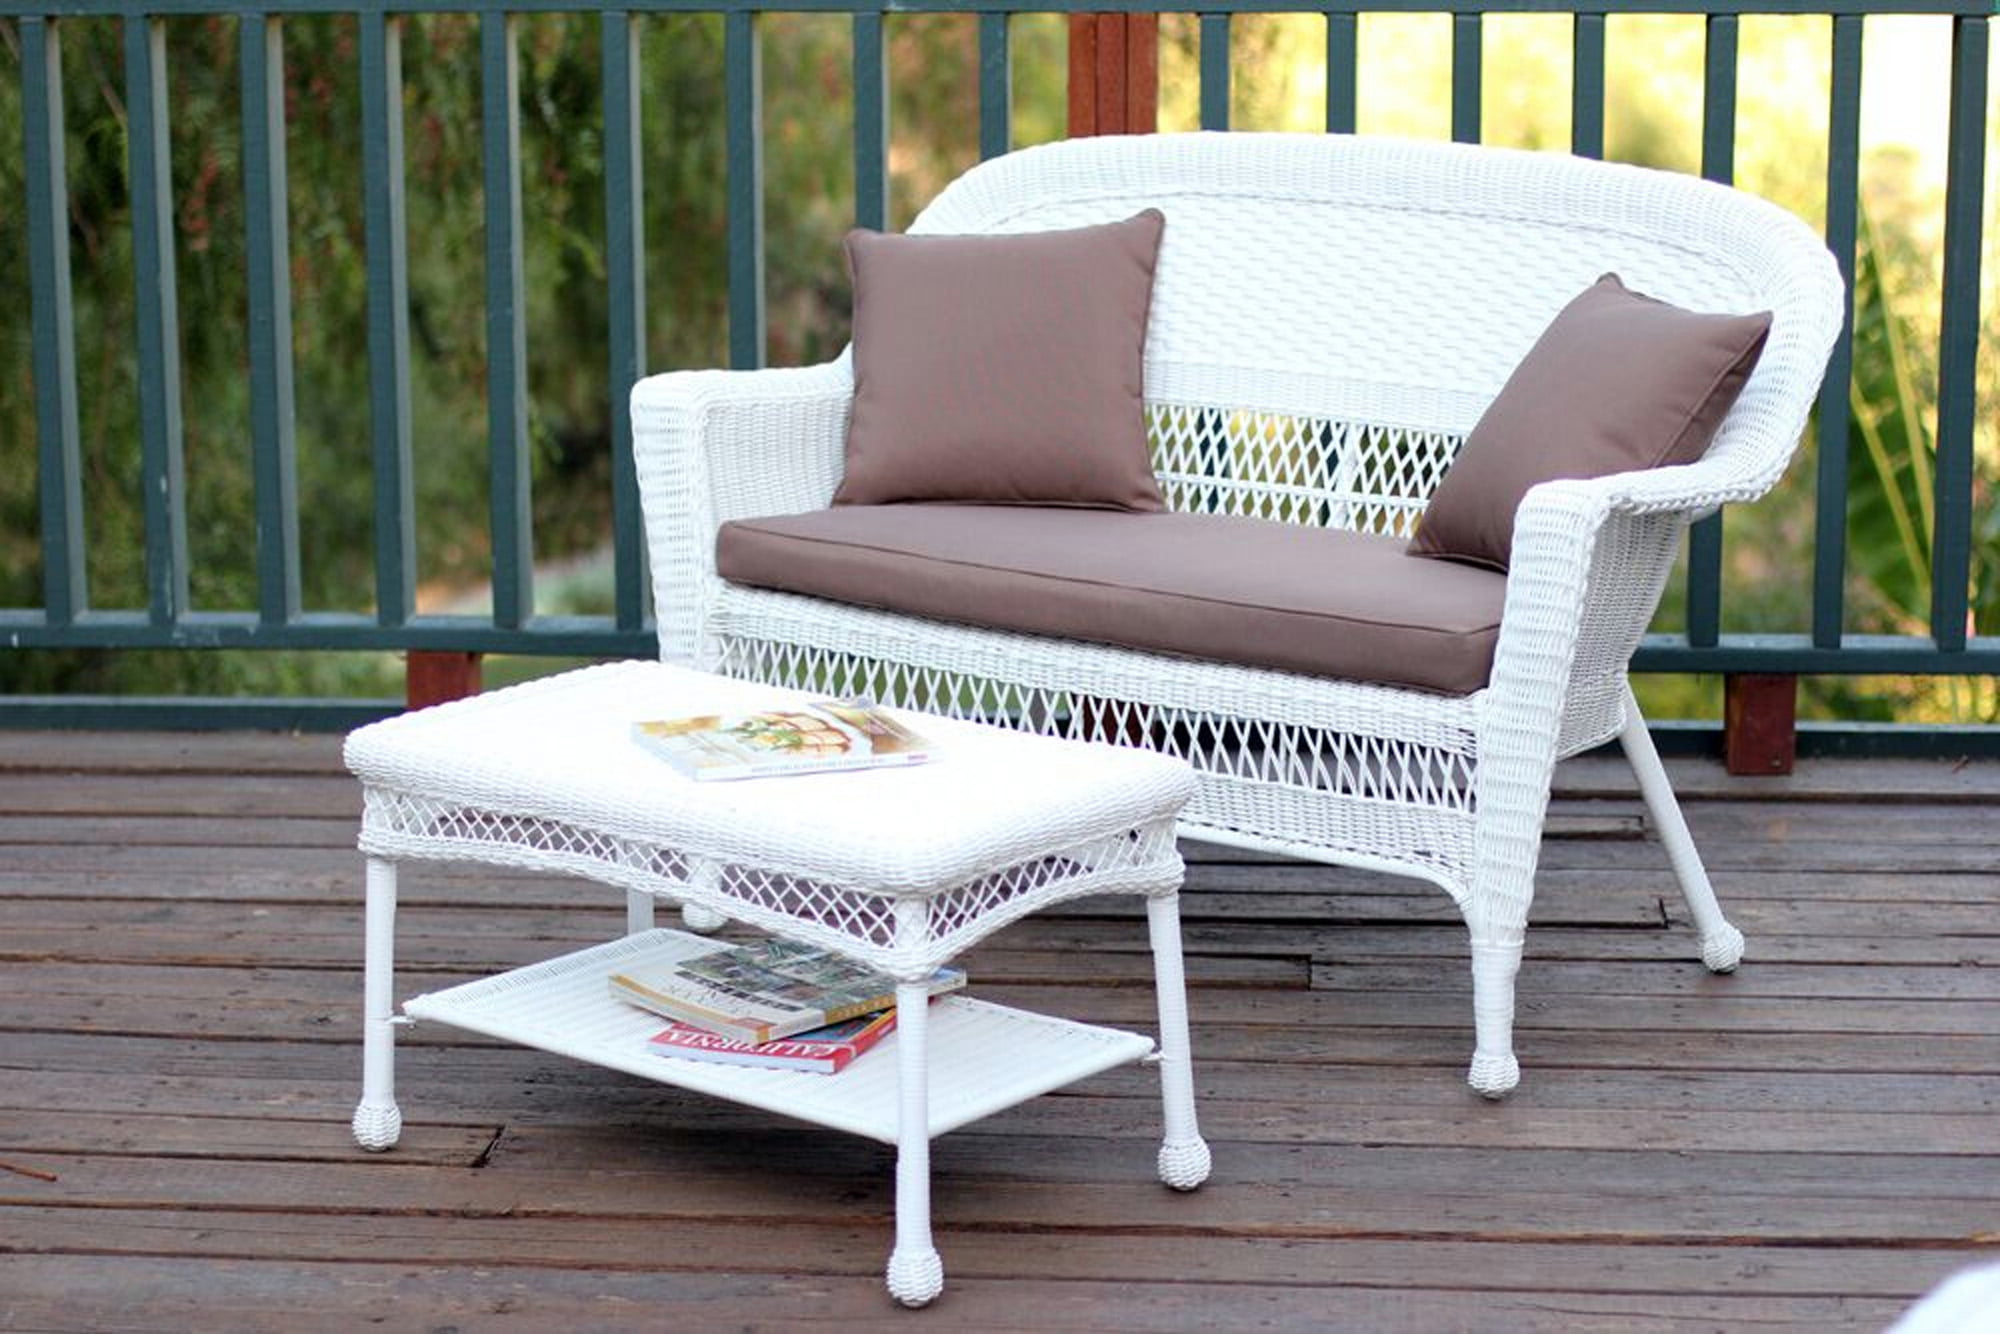 2-Piece Aurora White Resin Wicker Patio Loveseat and Coffee Table